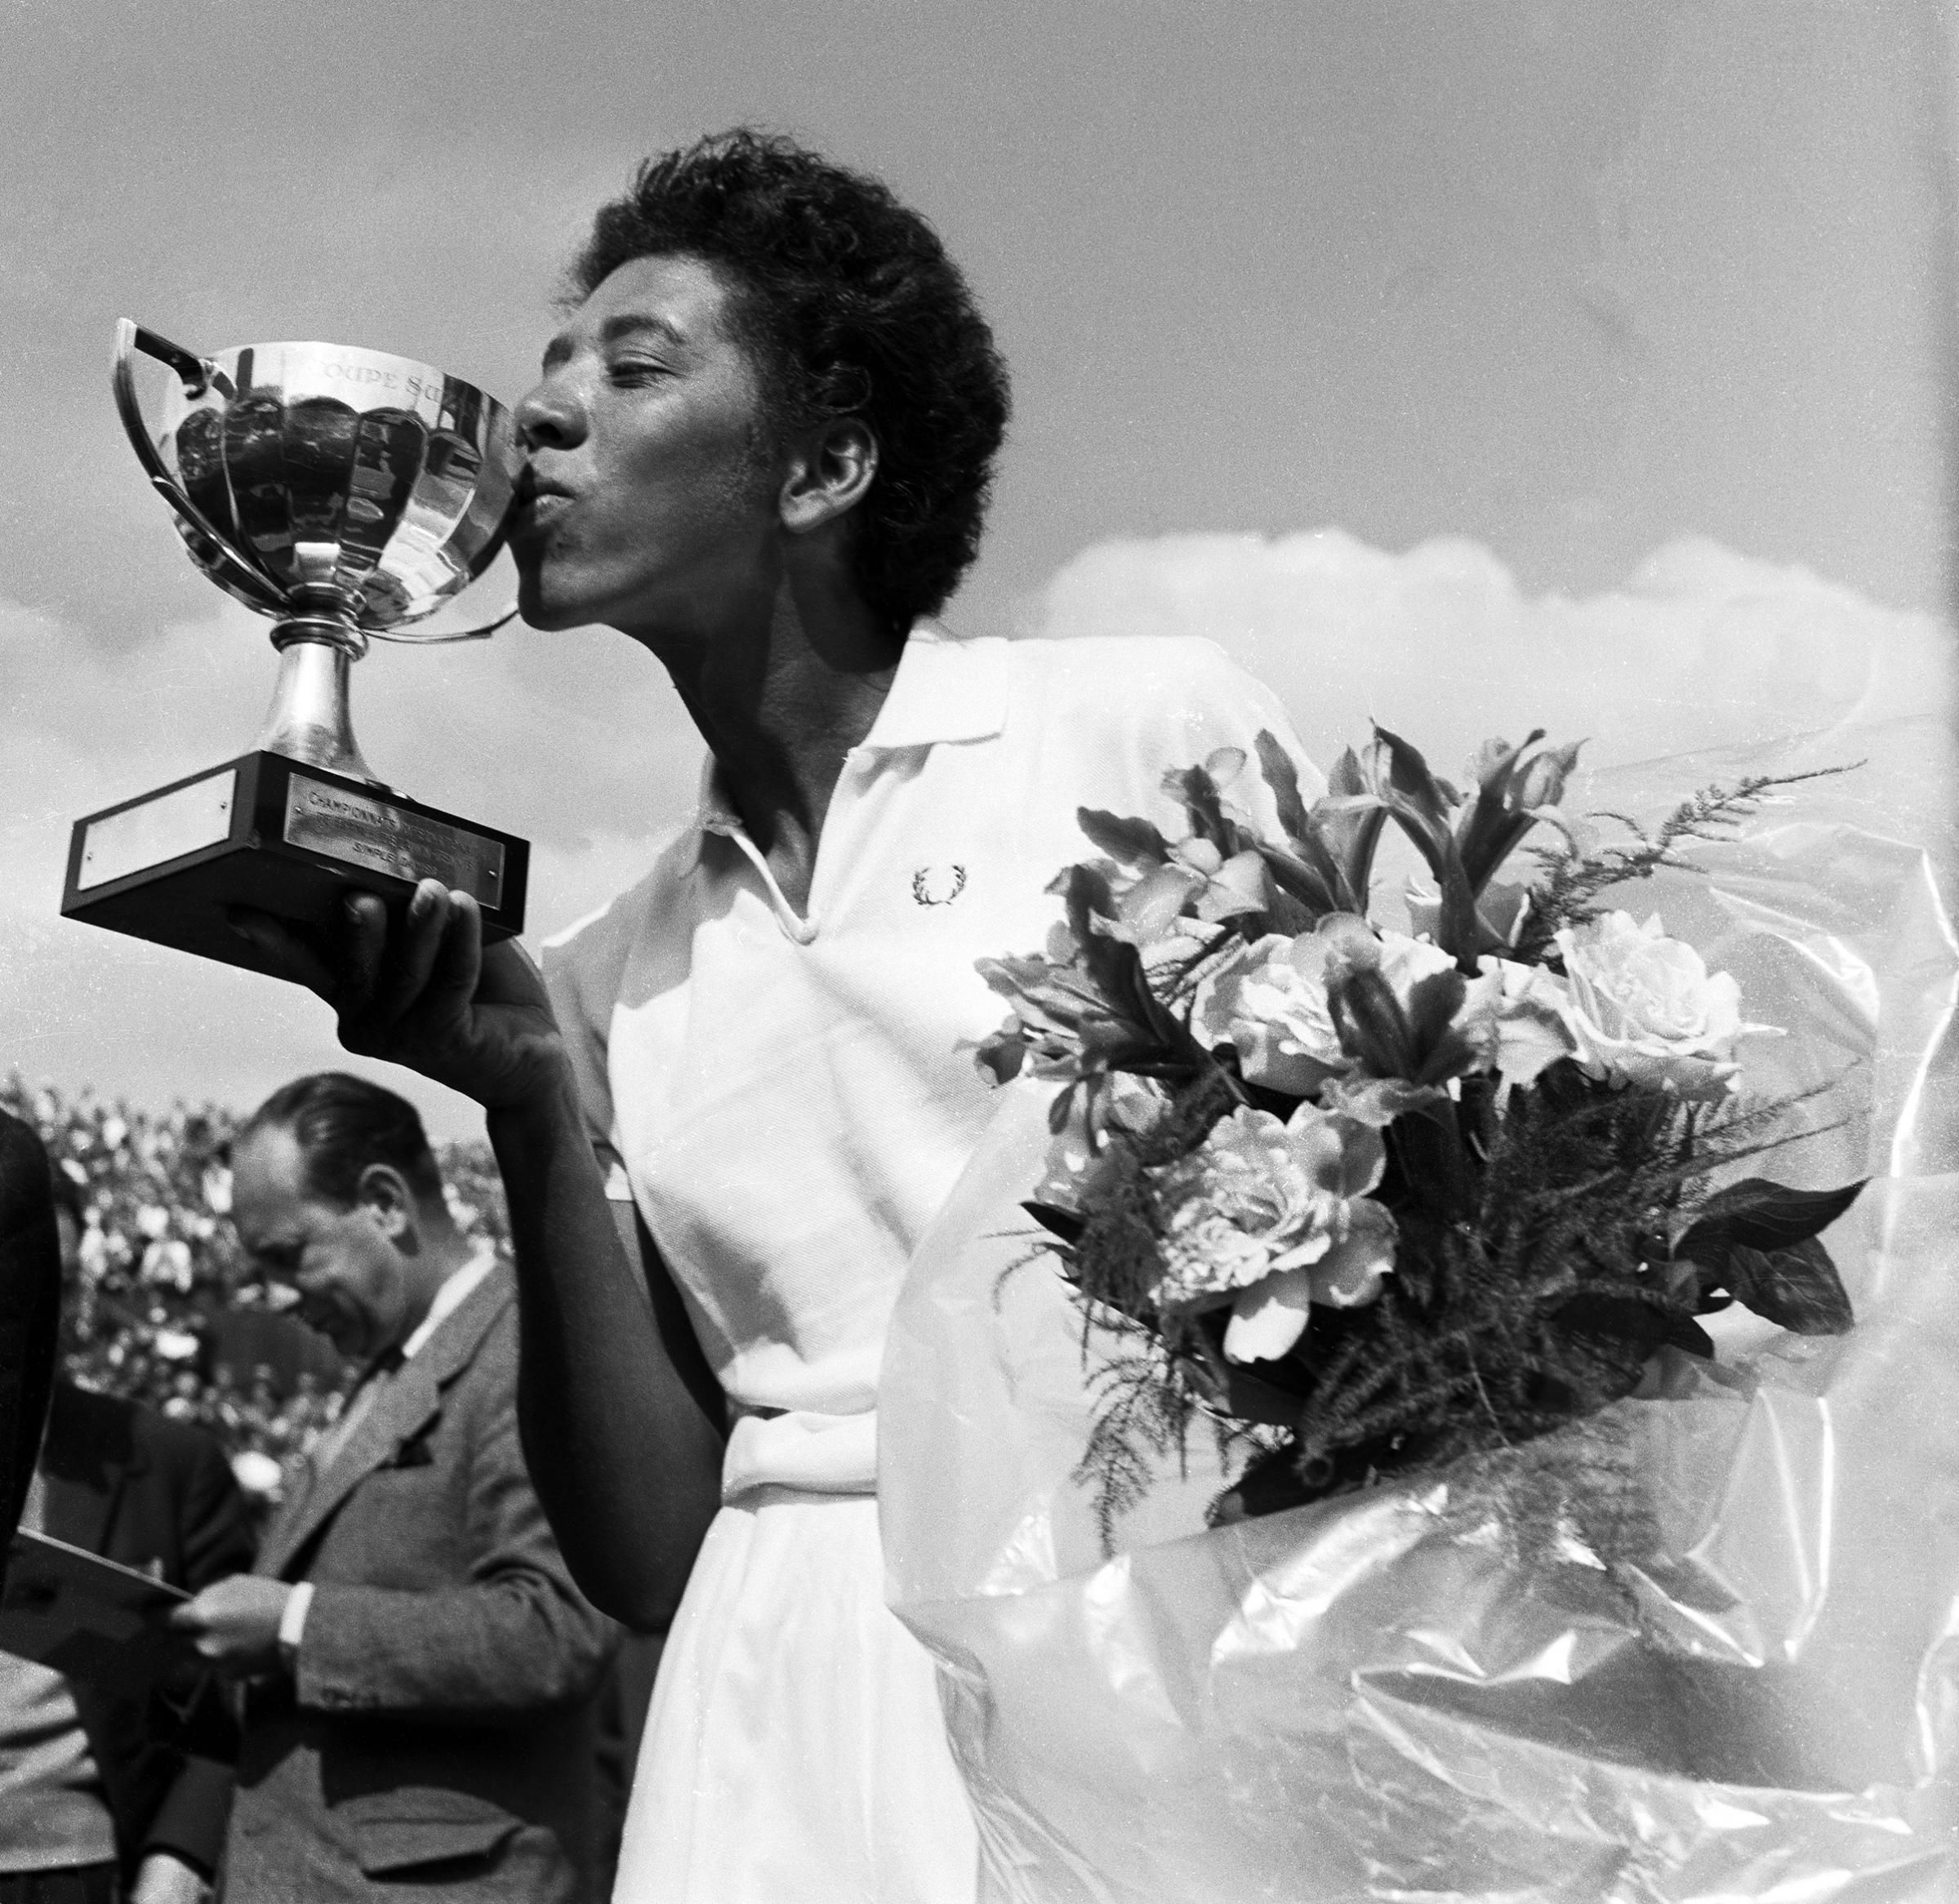 ALTHEA GIBSON: The first black athlete to cross the color line of international tennis and th efirst person of color to win a Grand Slam title in 1956.